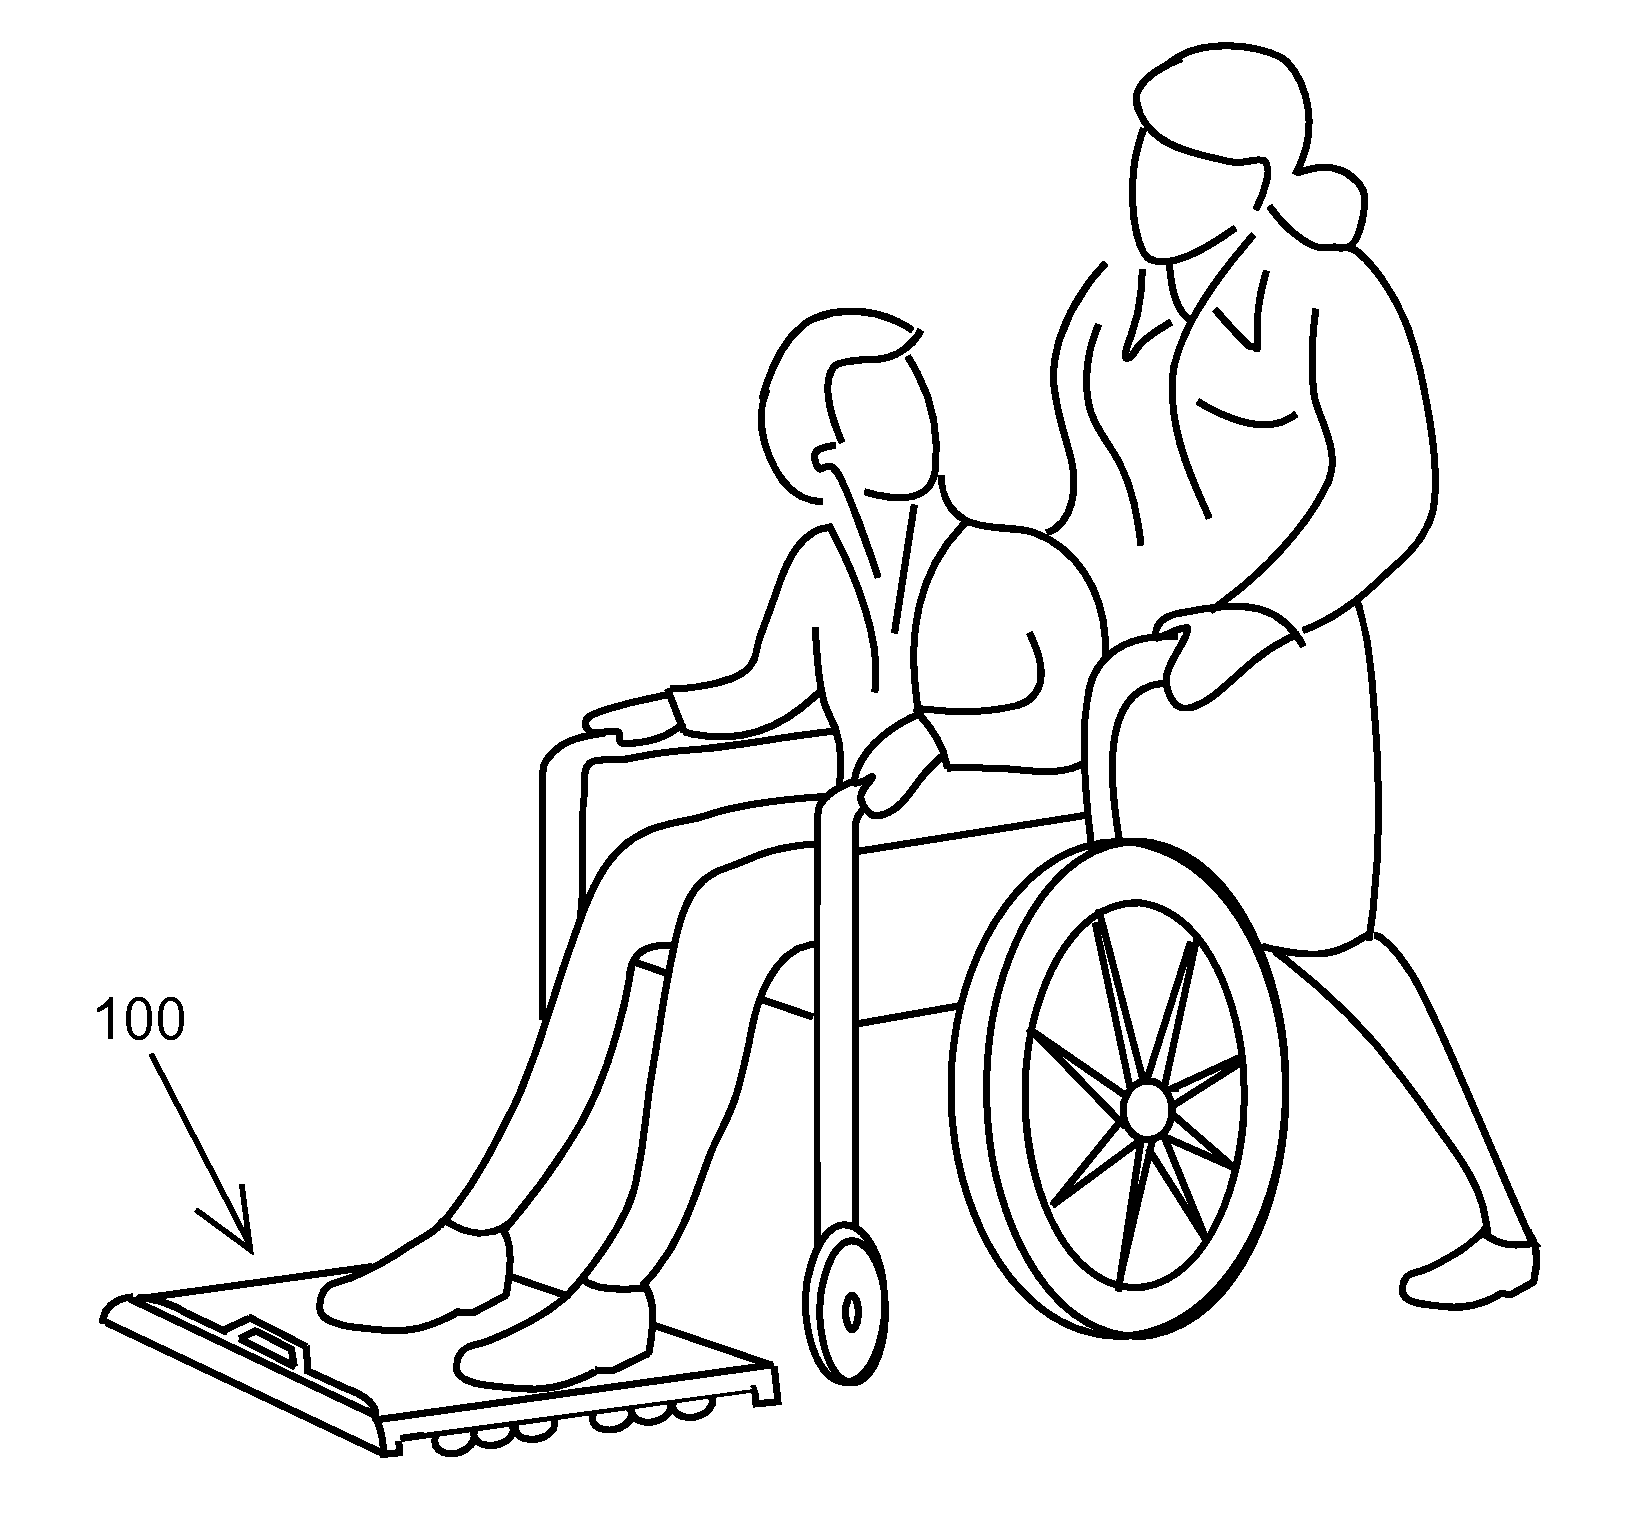 Apparatus and Method for Transporting a Patient in a Wheelchair